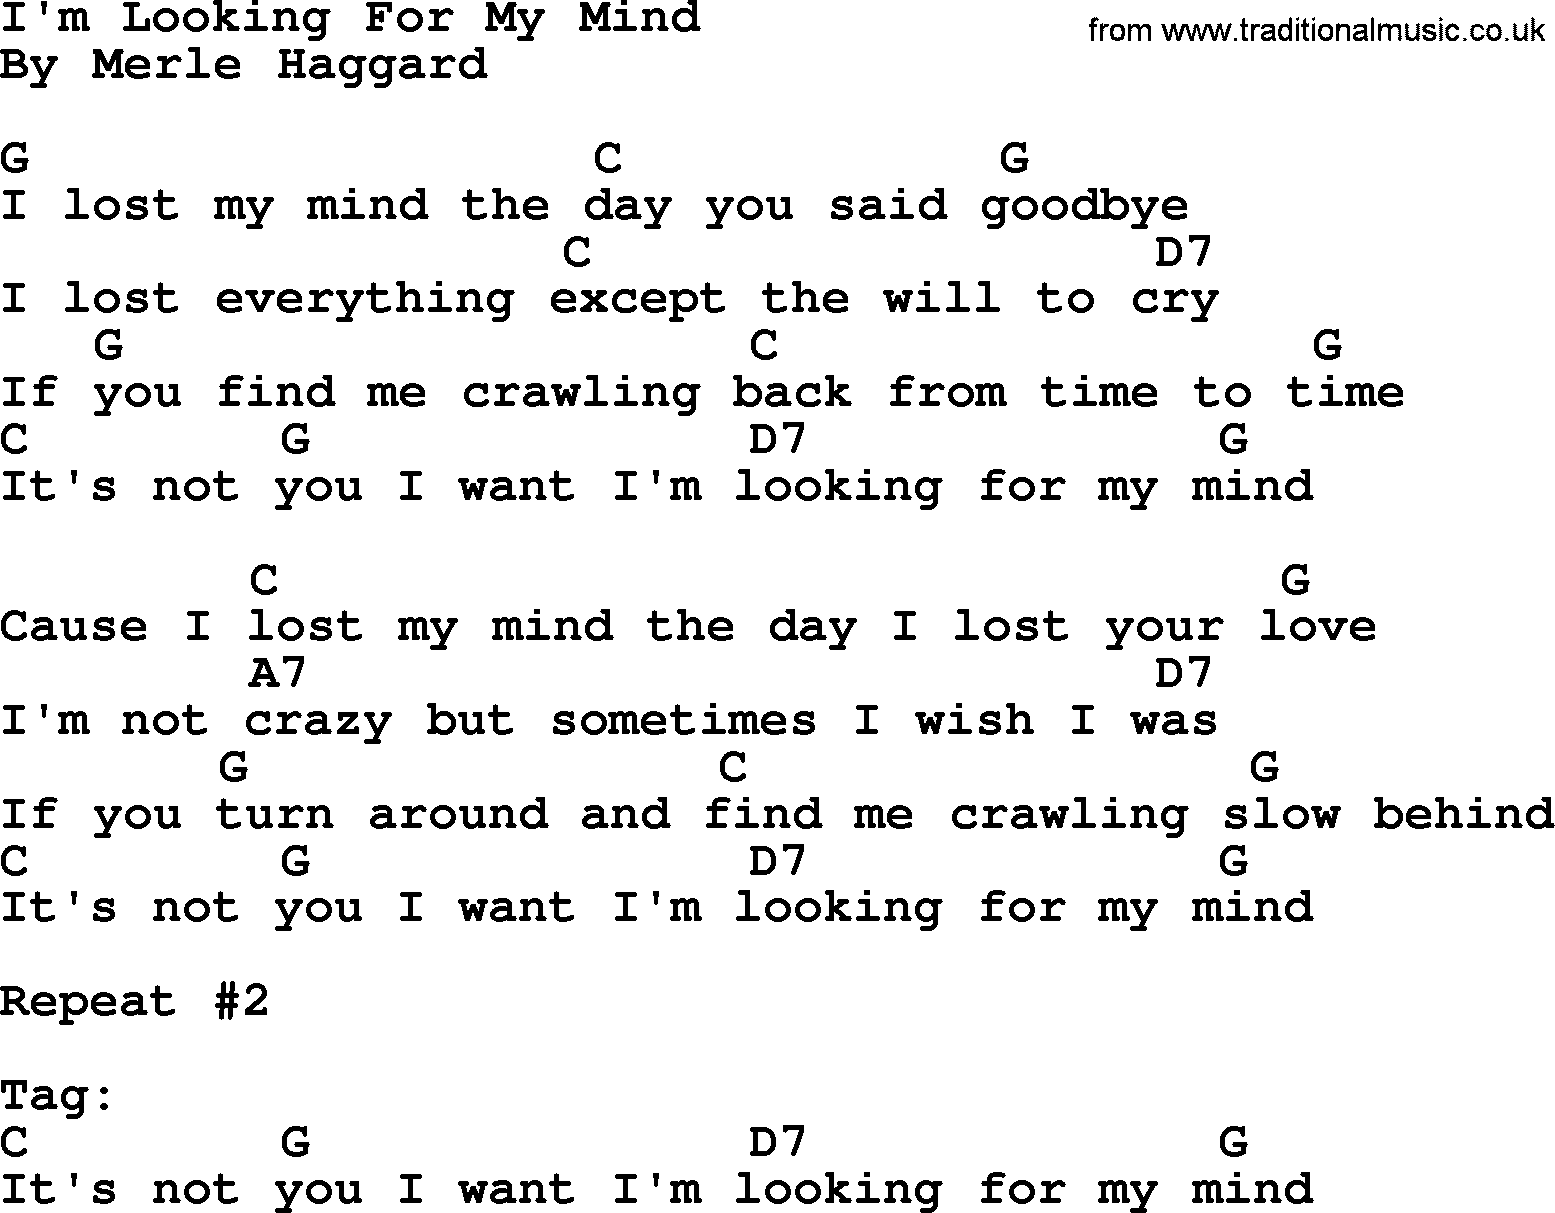 Merle Haggard song: I'm Looking For My Mind, lyrics and chords